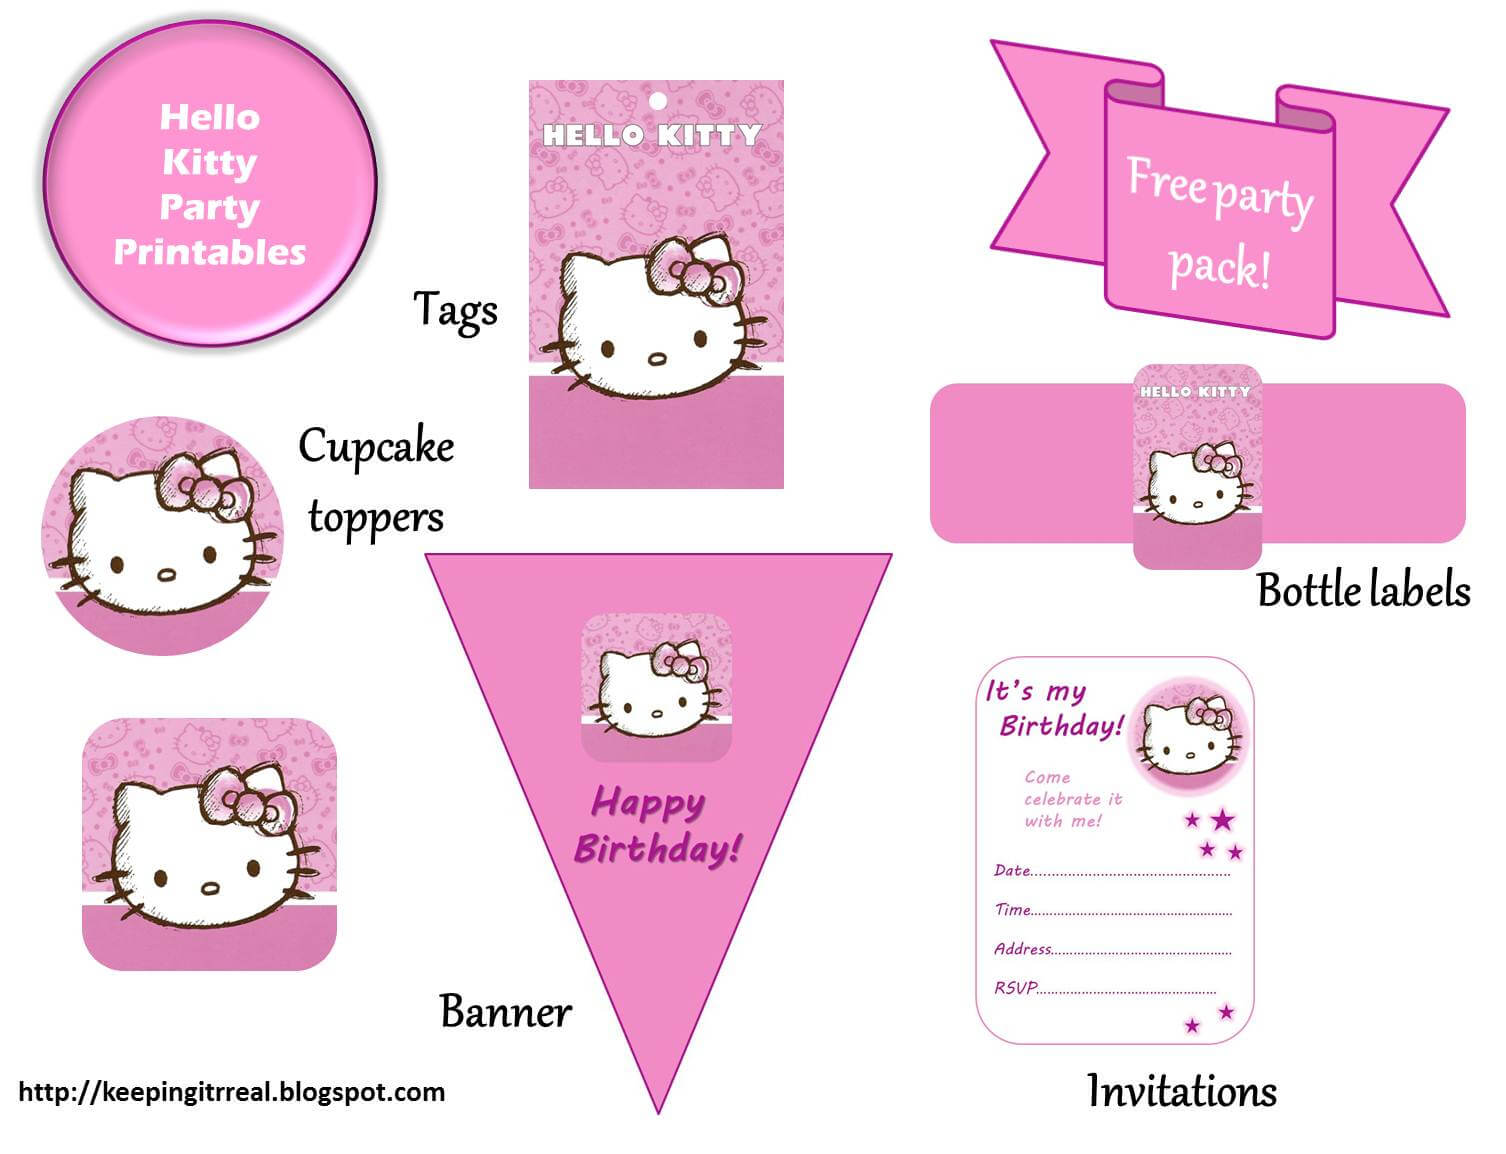 Hello Kitty Party Pack – Free Printables |Keeping It Real Throughout Hello Kitty Birthday Banner Template Free